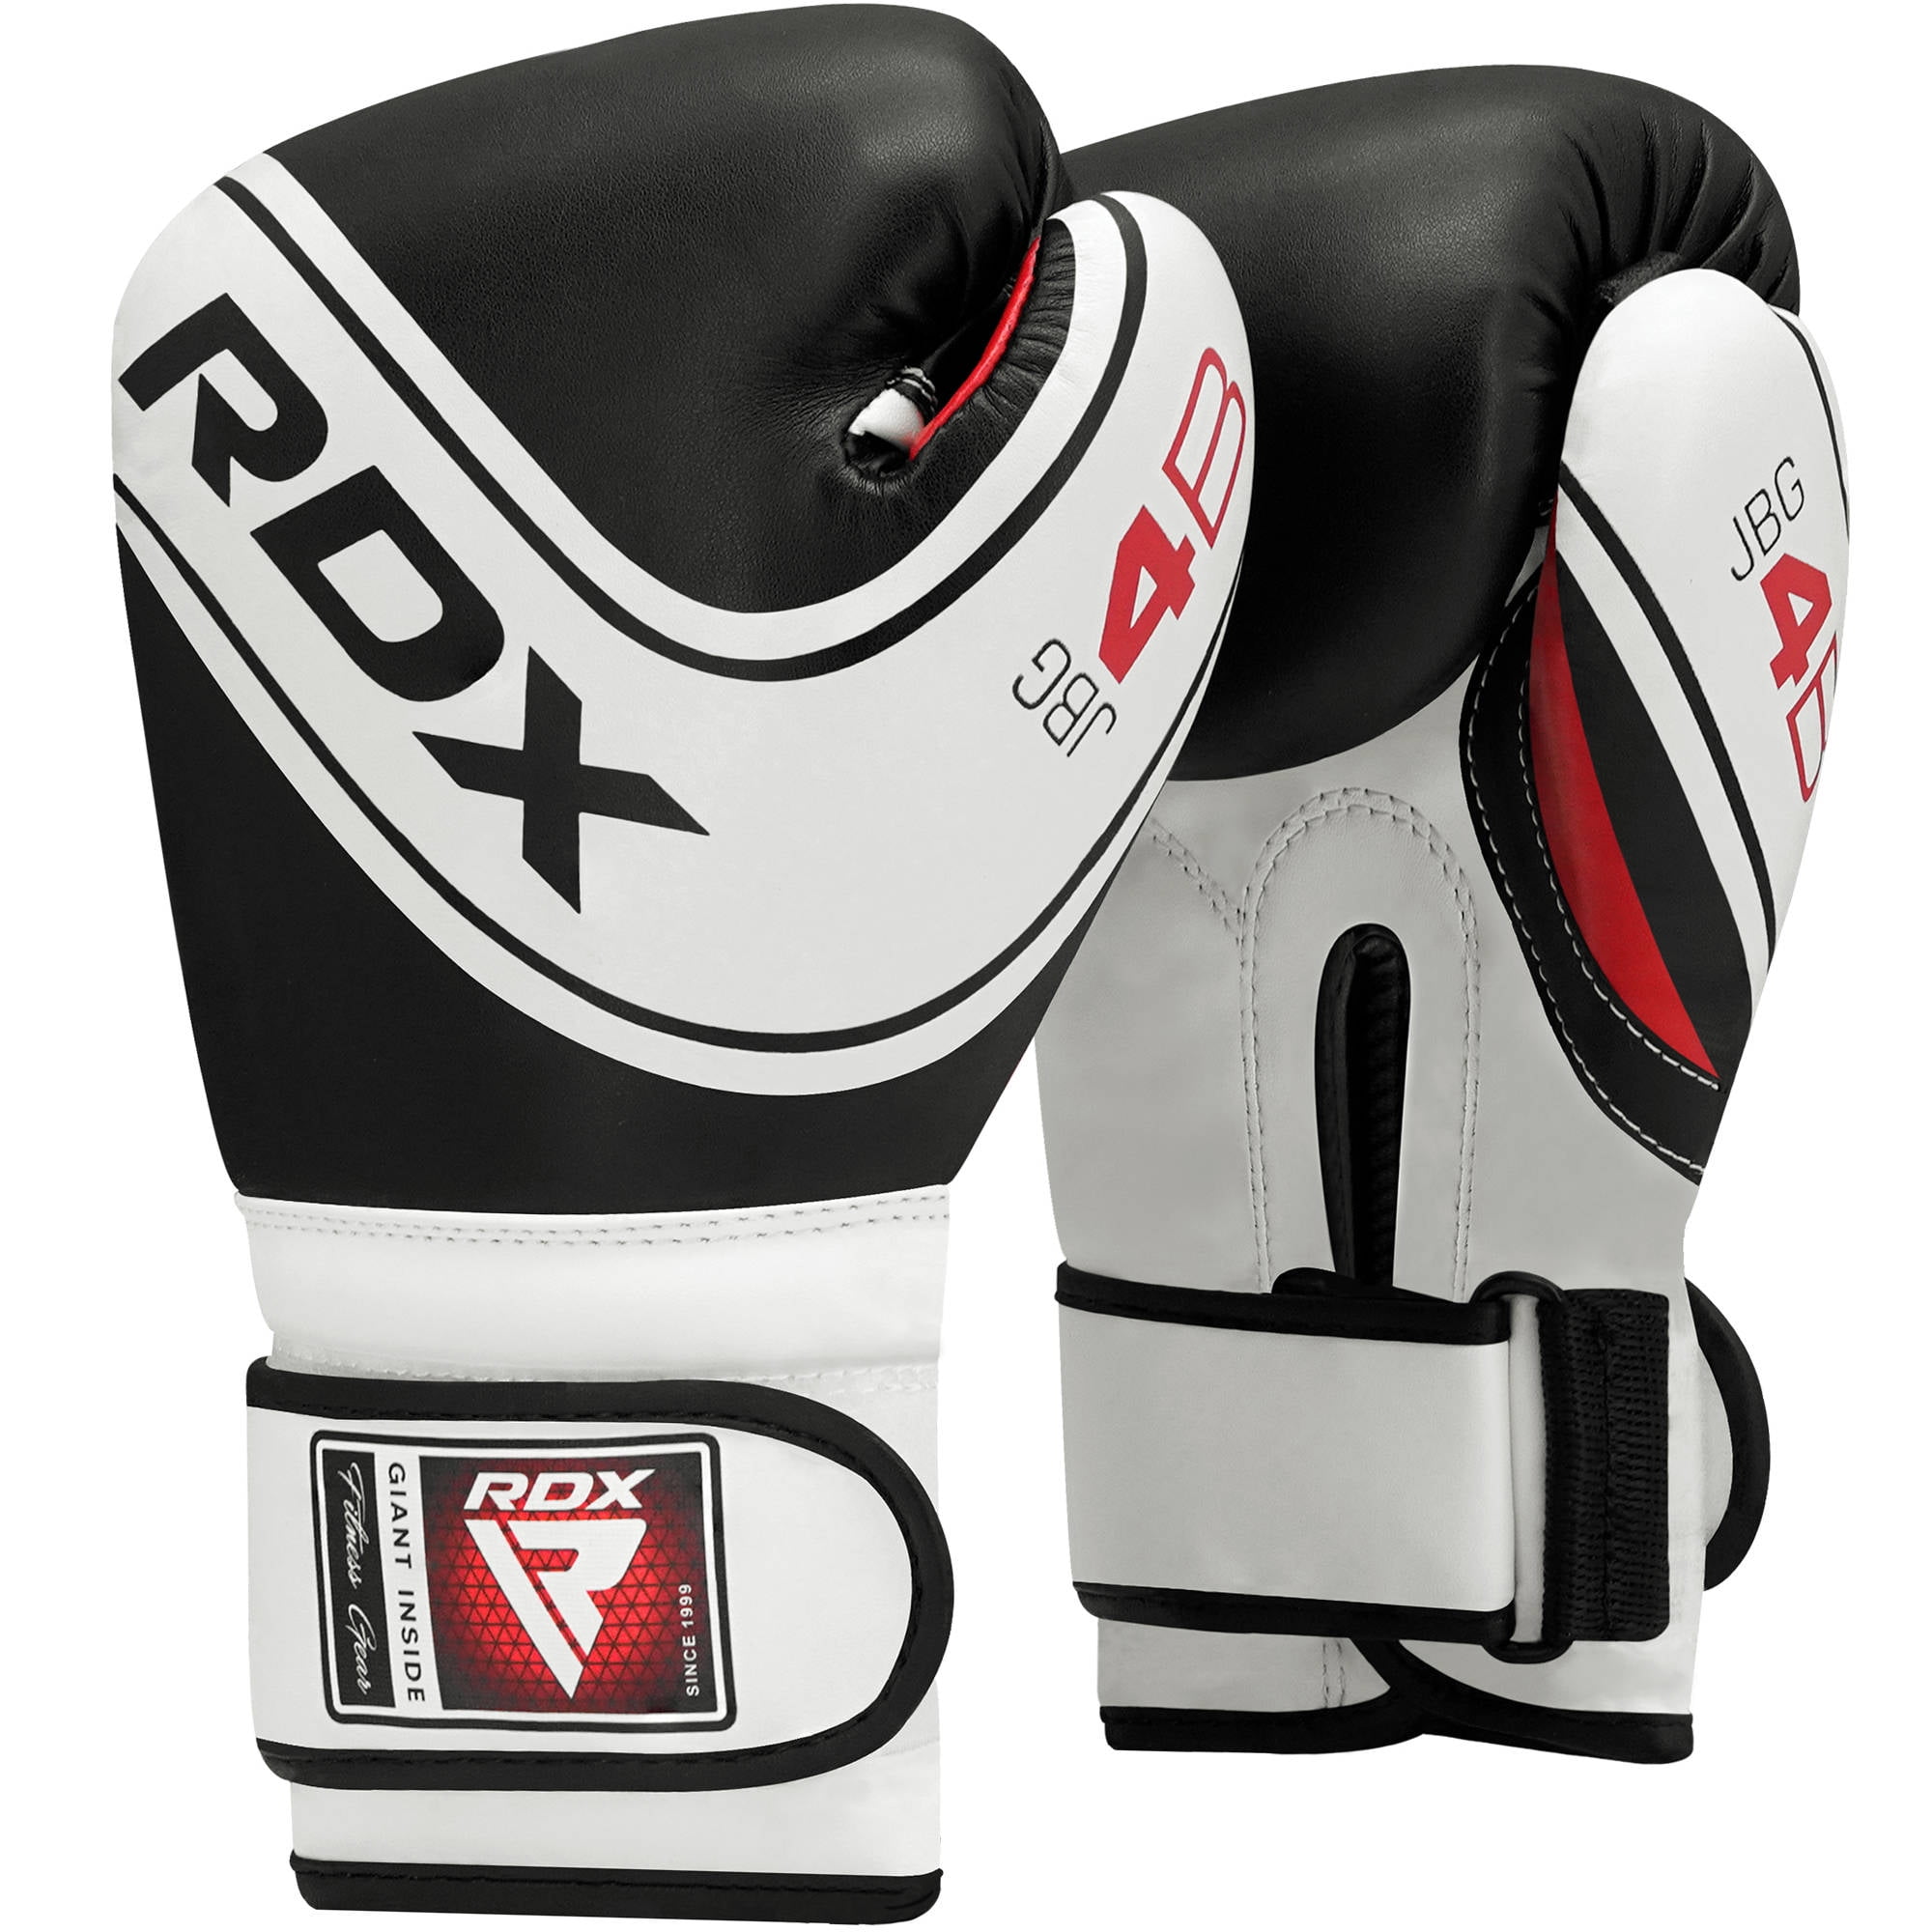 Kids Boxing Gloves 6oz MMA Sparring Punch Bag Muay Thai Rex Leather mitts 